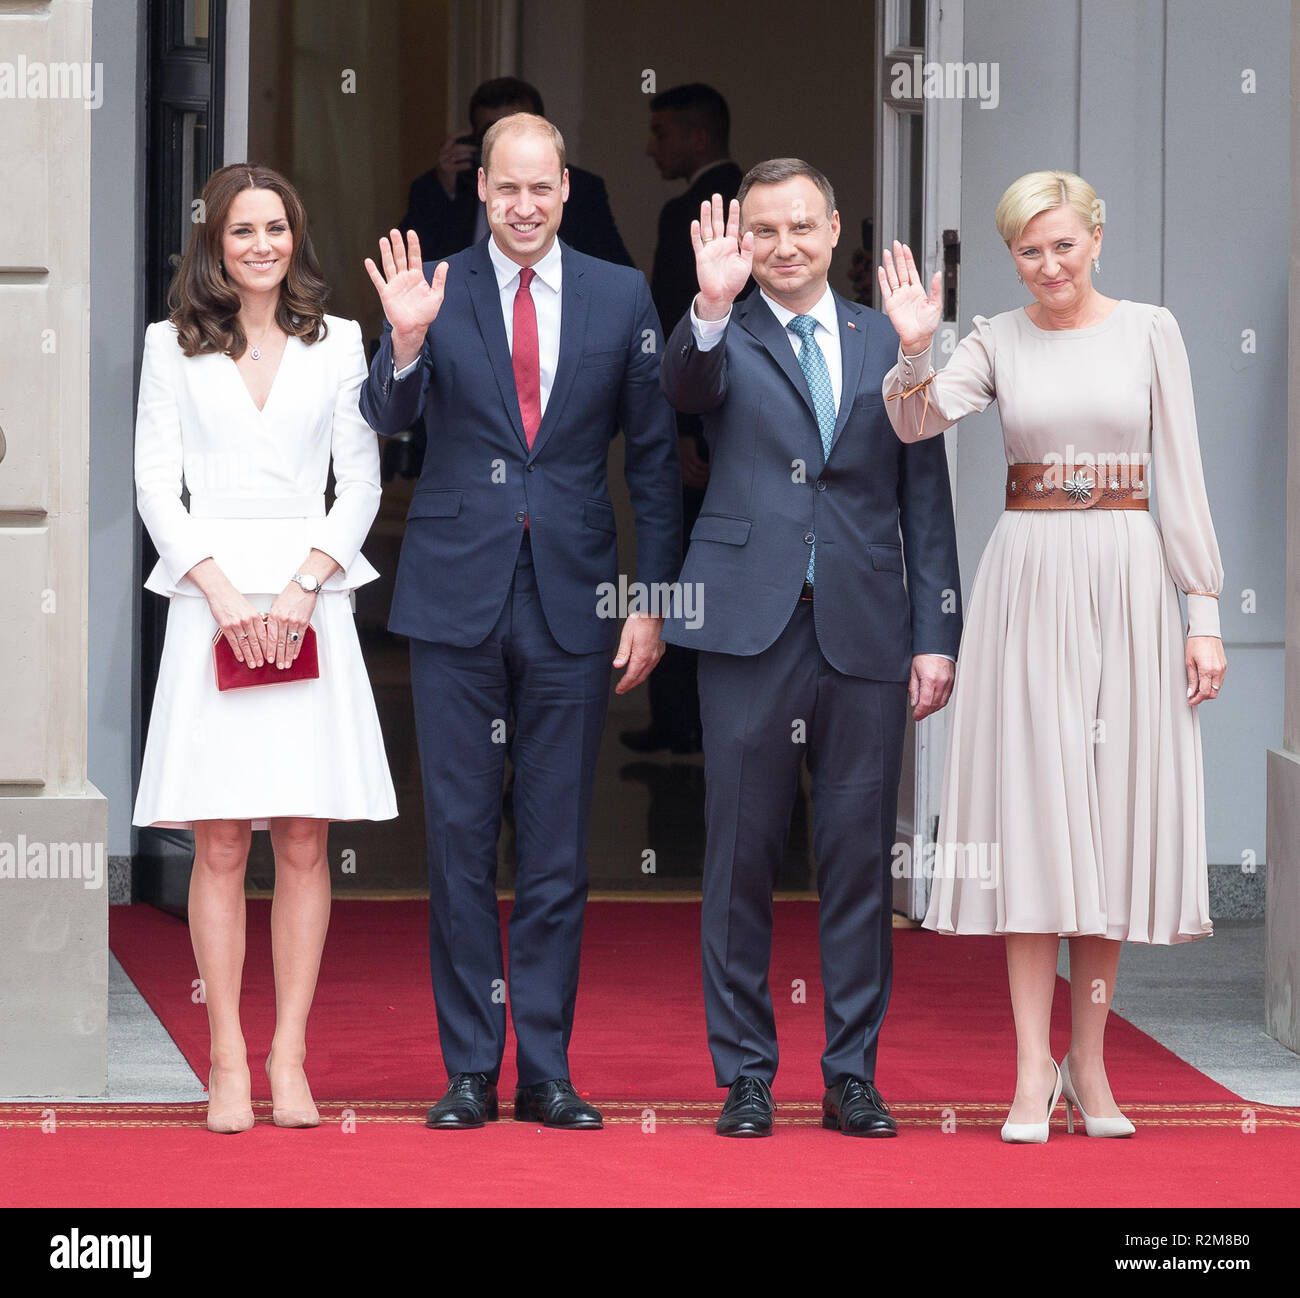 Prince William, Duke of Cambridge and Catherine Duchess of Cambridge during the welcoming by the President of the Republic of Poland Andrzej Duda and First Lady Agata Kornhauser-Duda in front of the Presidential Palace in Warsaw, Poland on 17 July 2017 Stock Photo